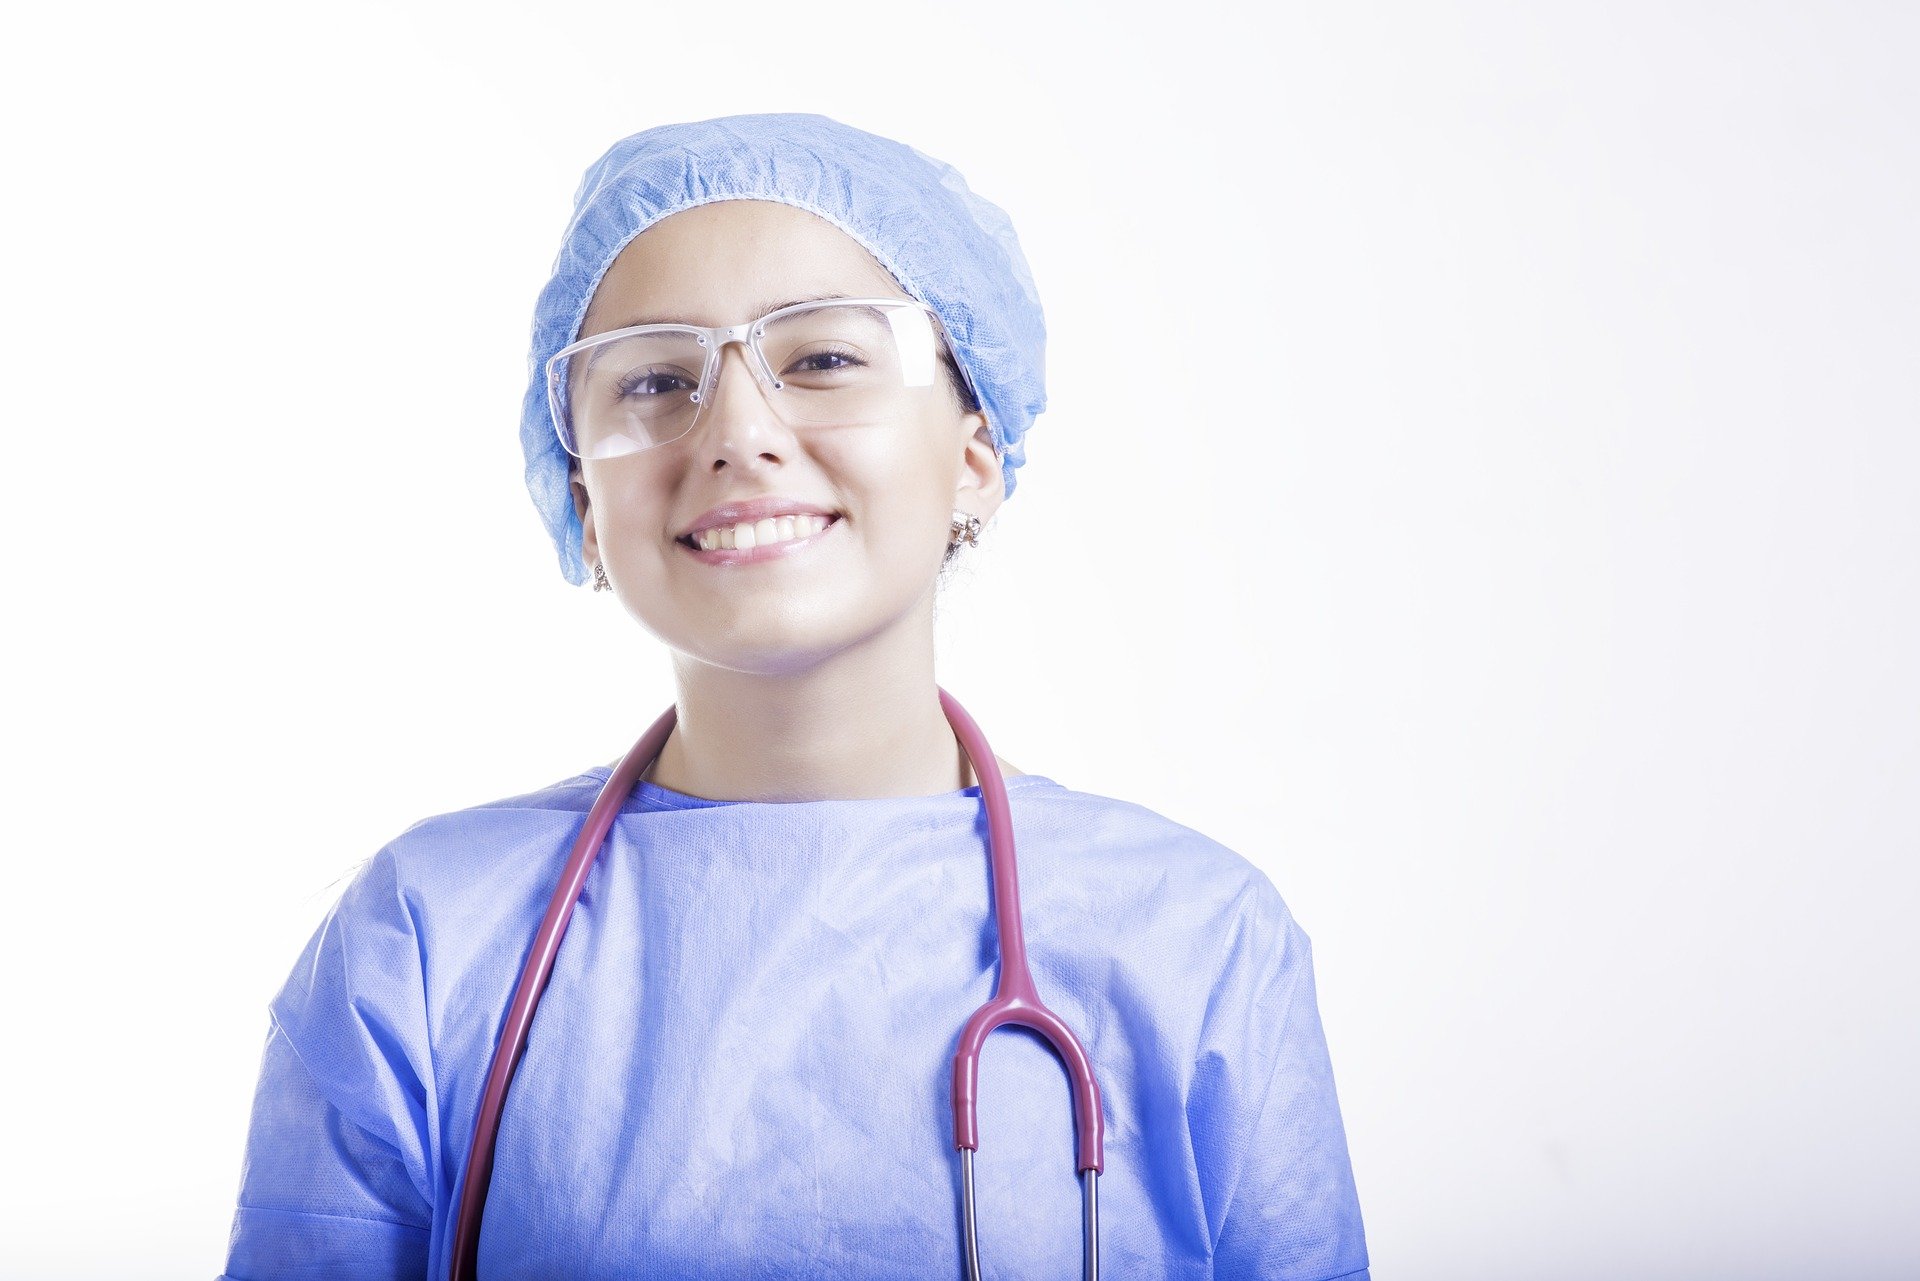 Top 7 Career Options to Pursue With a Nursing Degree